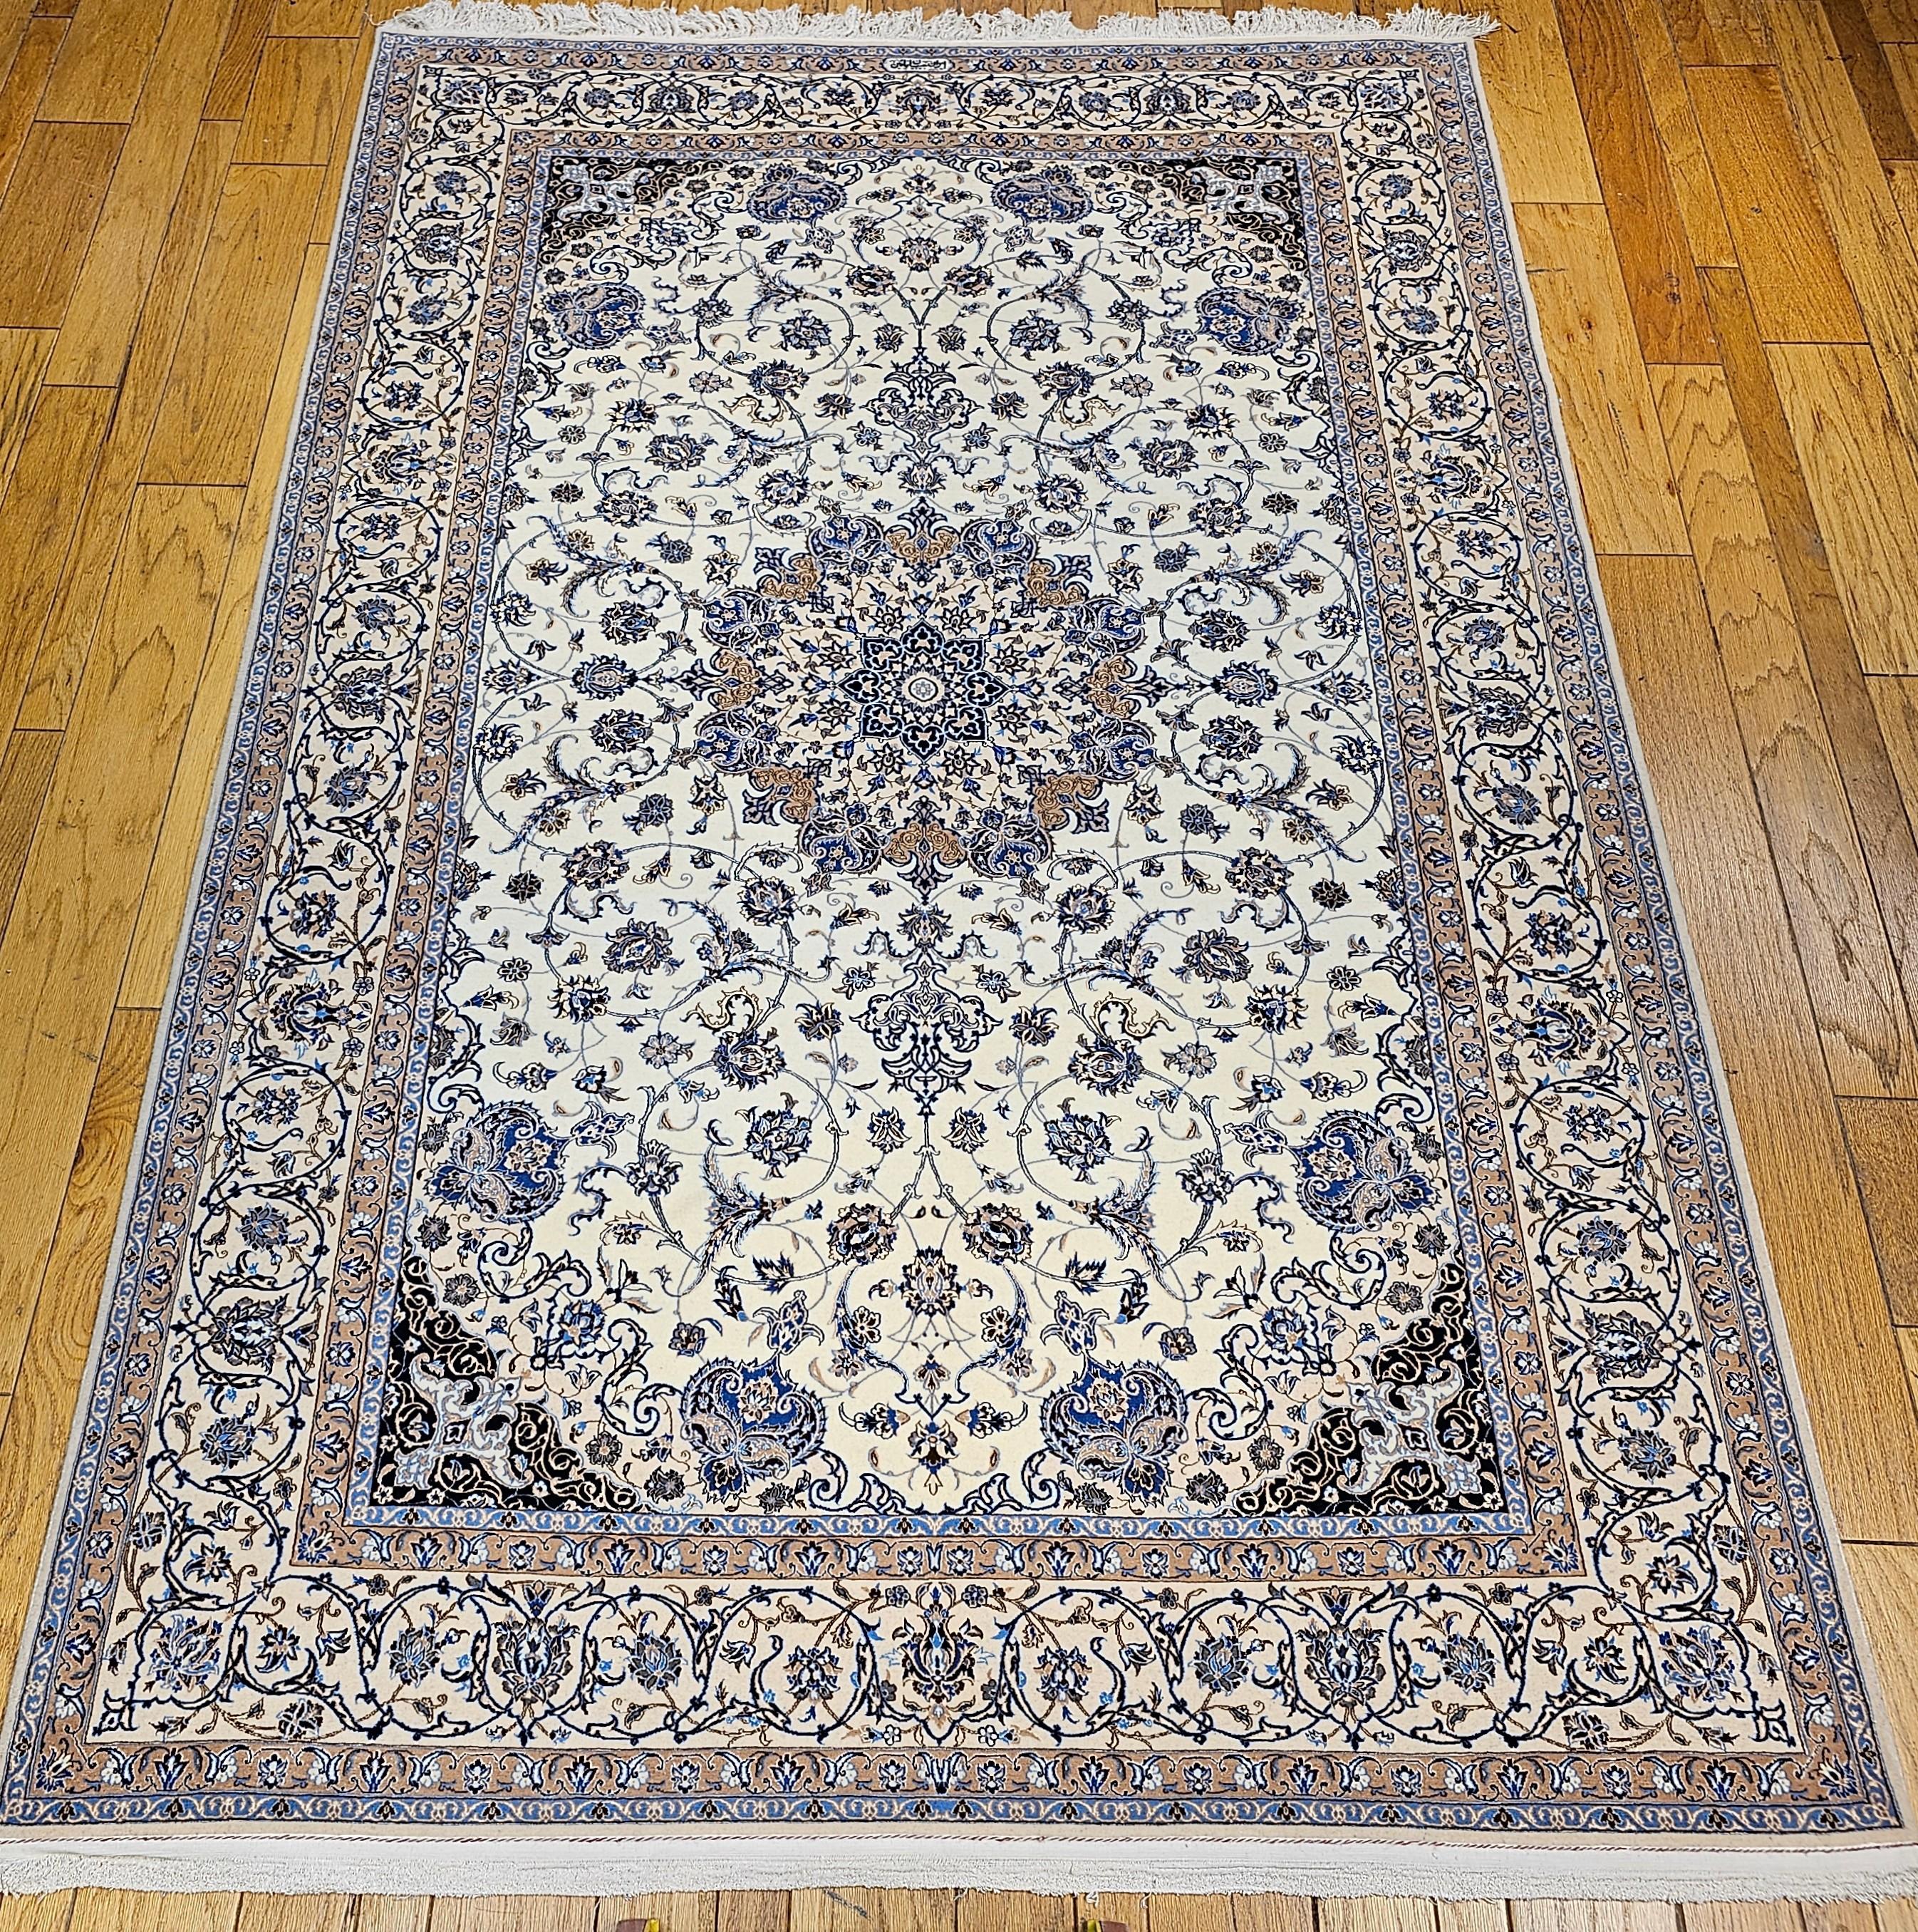 An extremely fine weave handwoven Nain area rug from the 4th quarter of the 1900s.  The Nain Habibian is in an ivory background, with a pale tan border and design accent colors in French blue, pale brown, and ivory colors with silk highlights